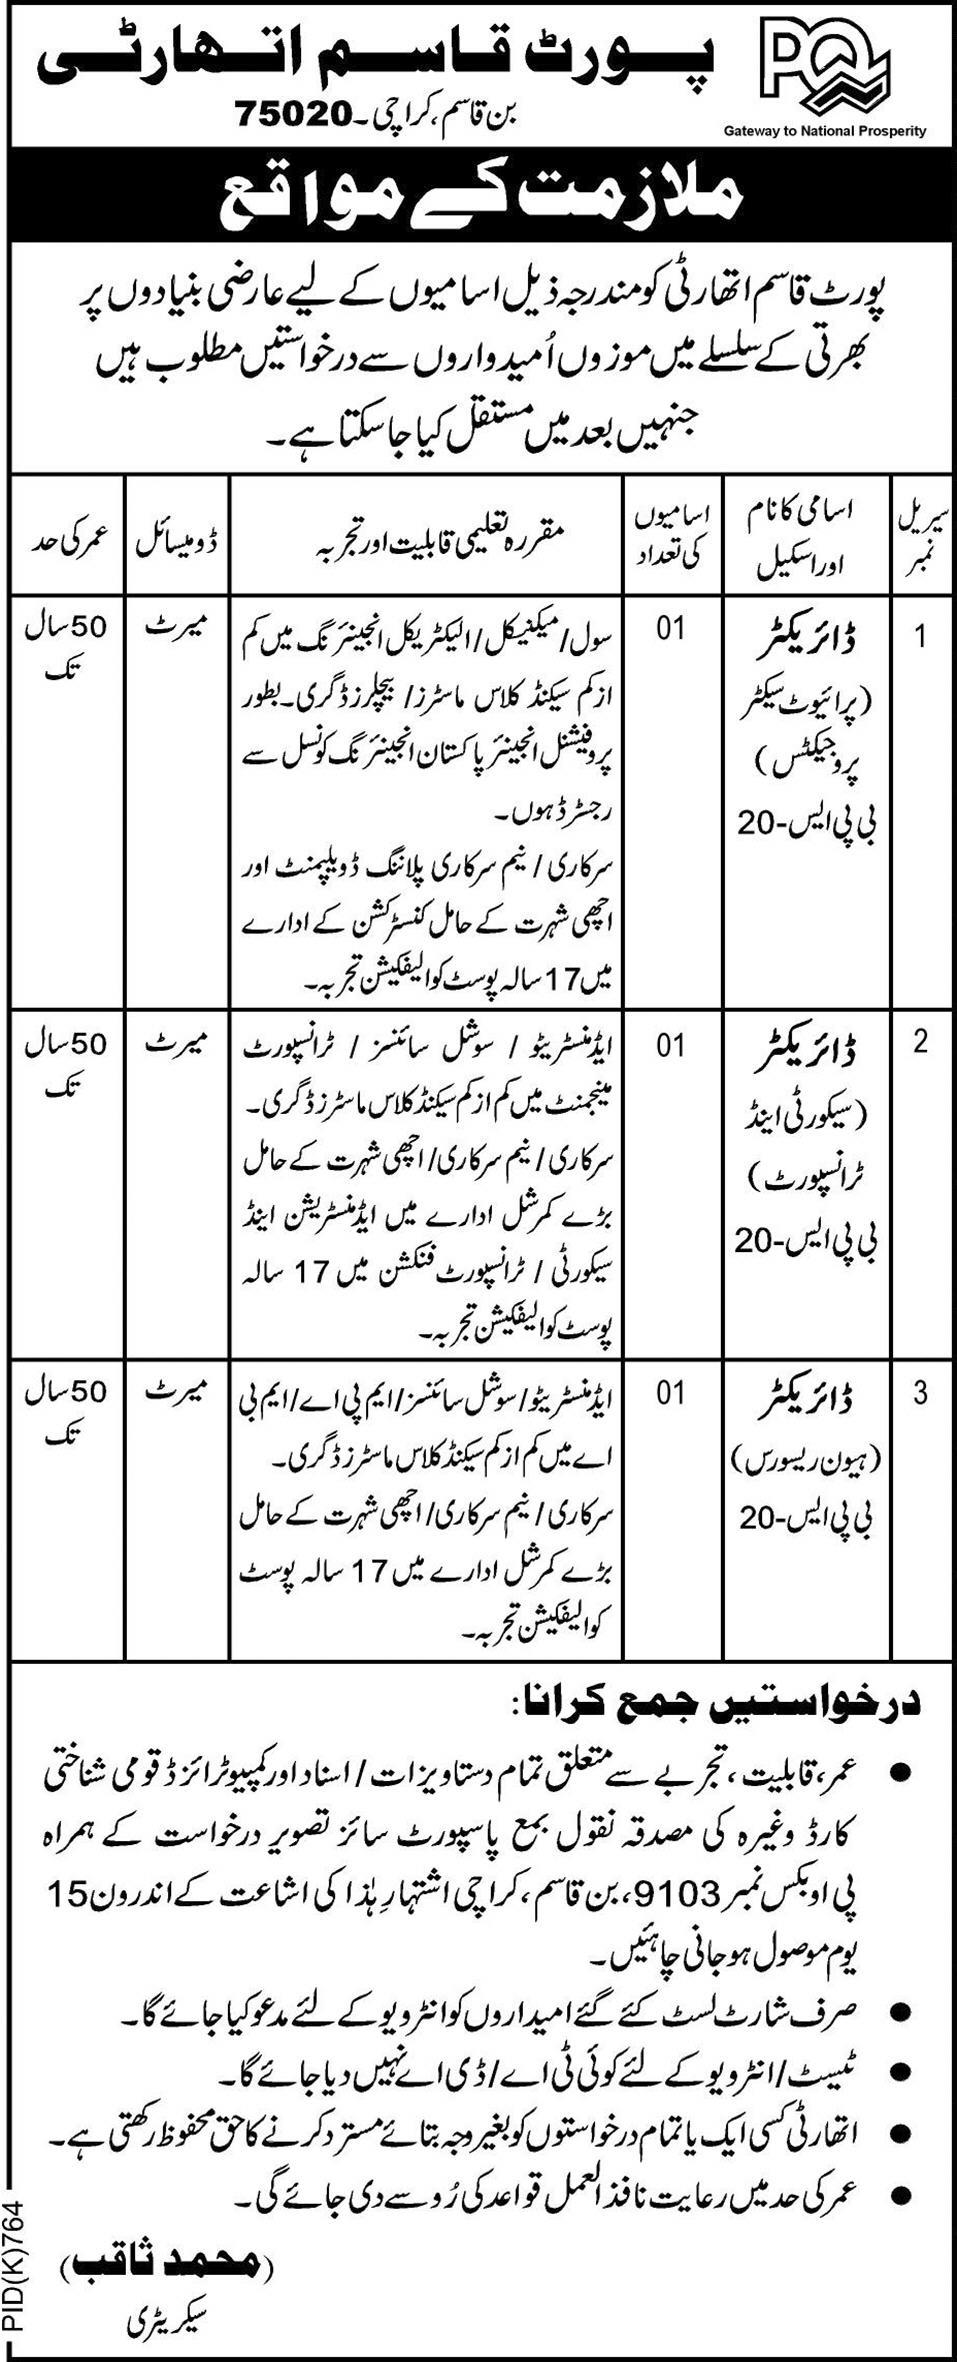 Port Qasim Authority Requires Directors HR, Security and Private Sector Projects (Government Job)